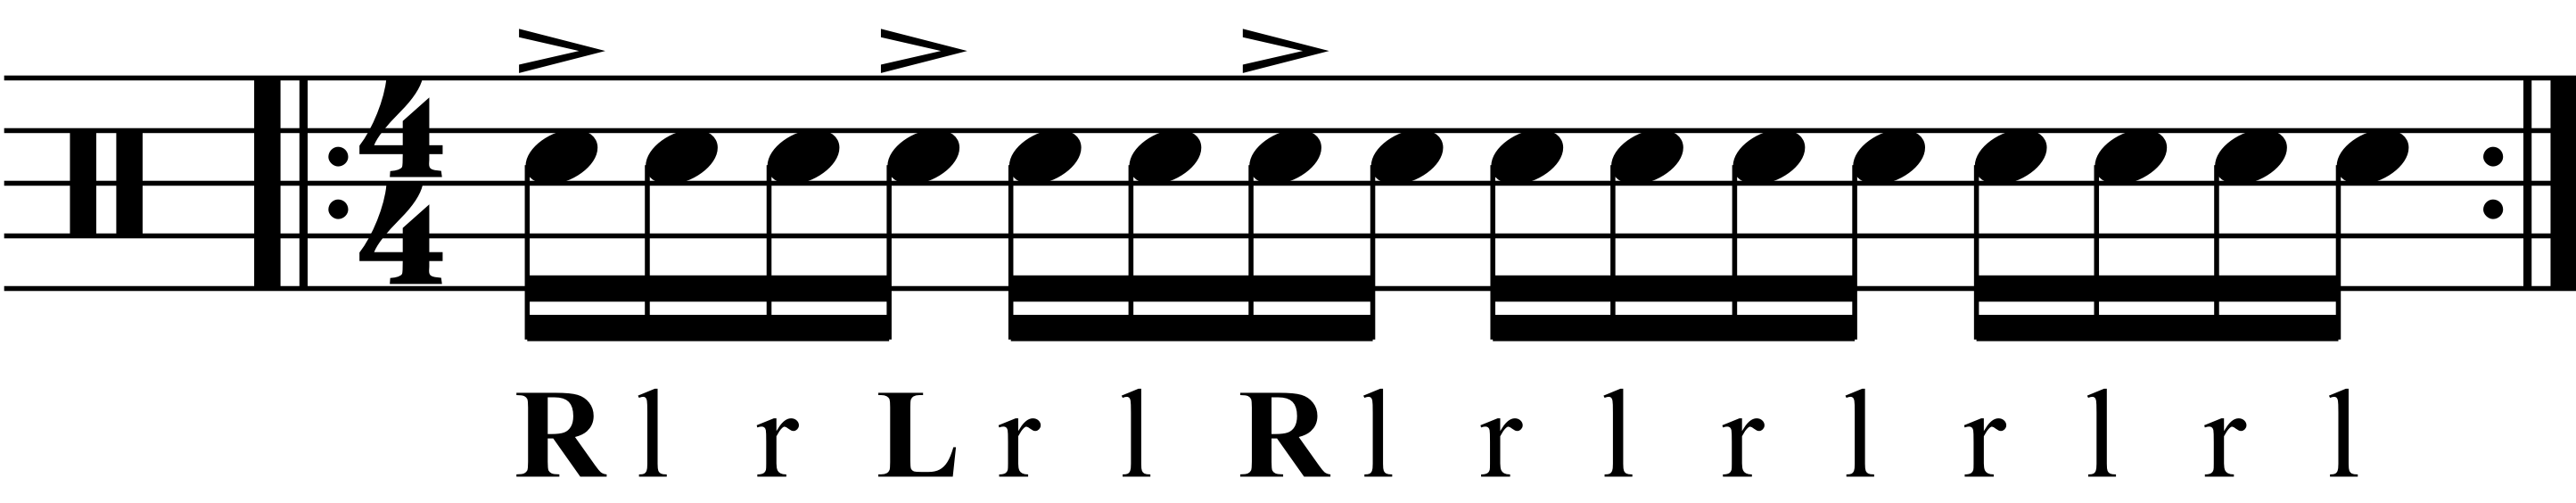 Syncopated accents in a single stroke roll